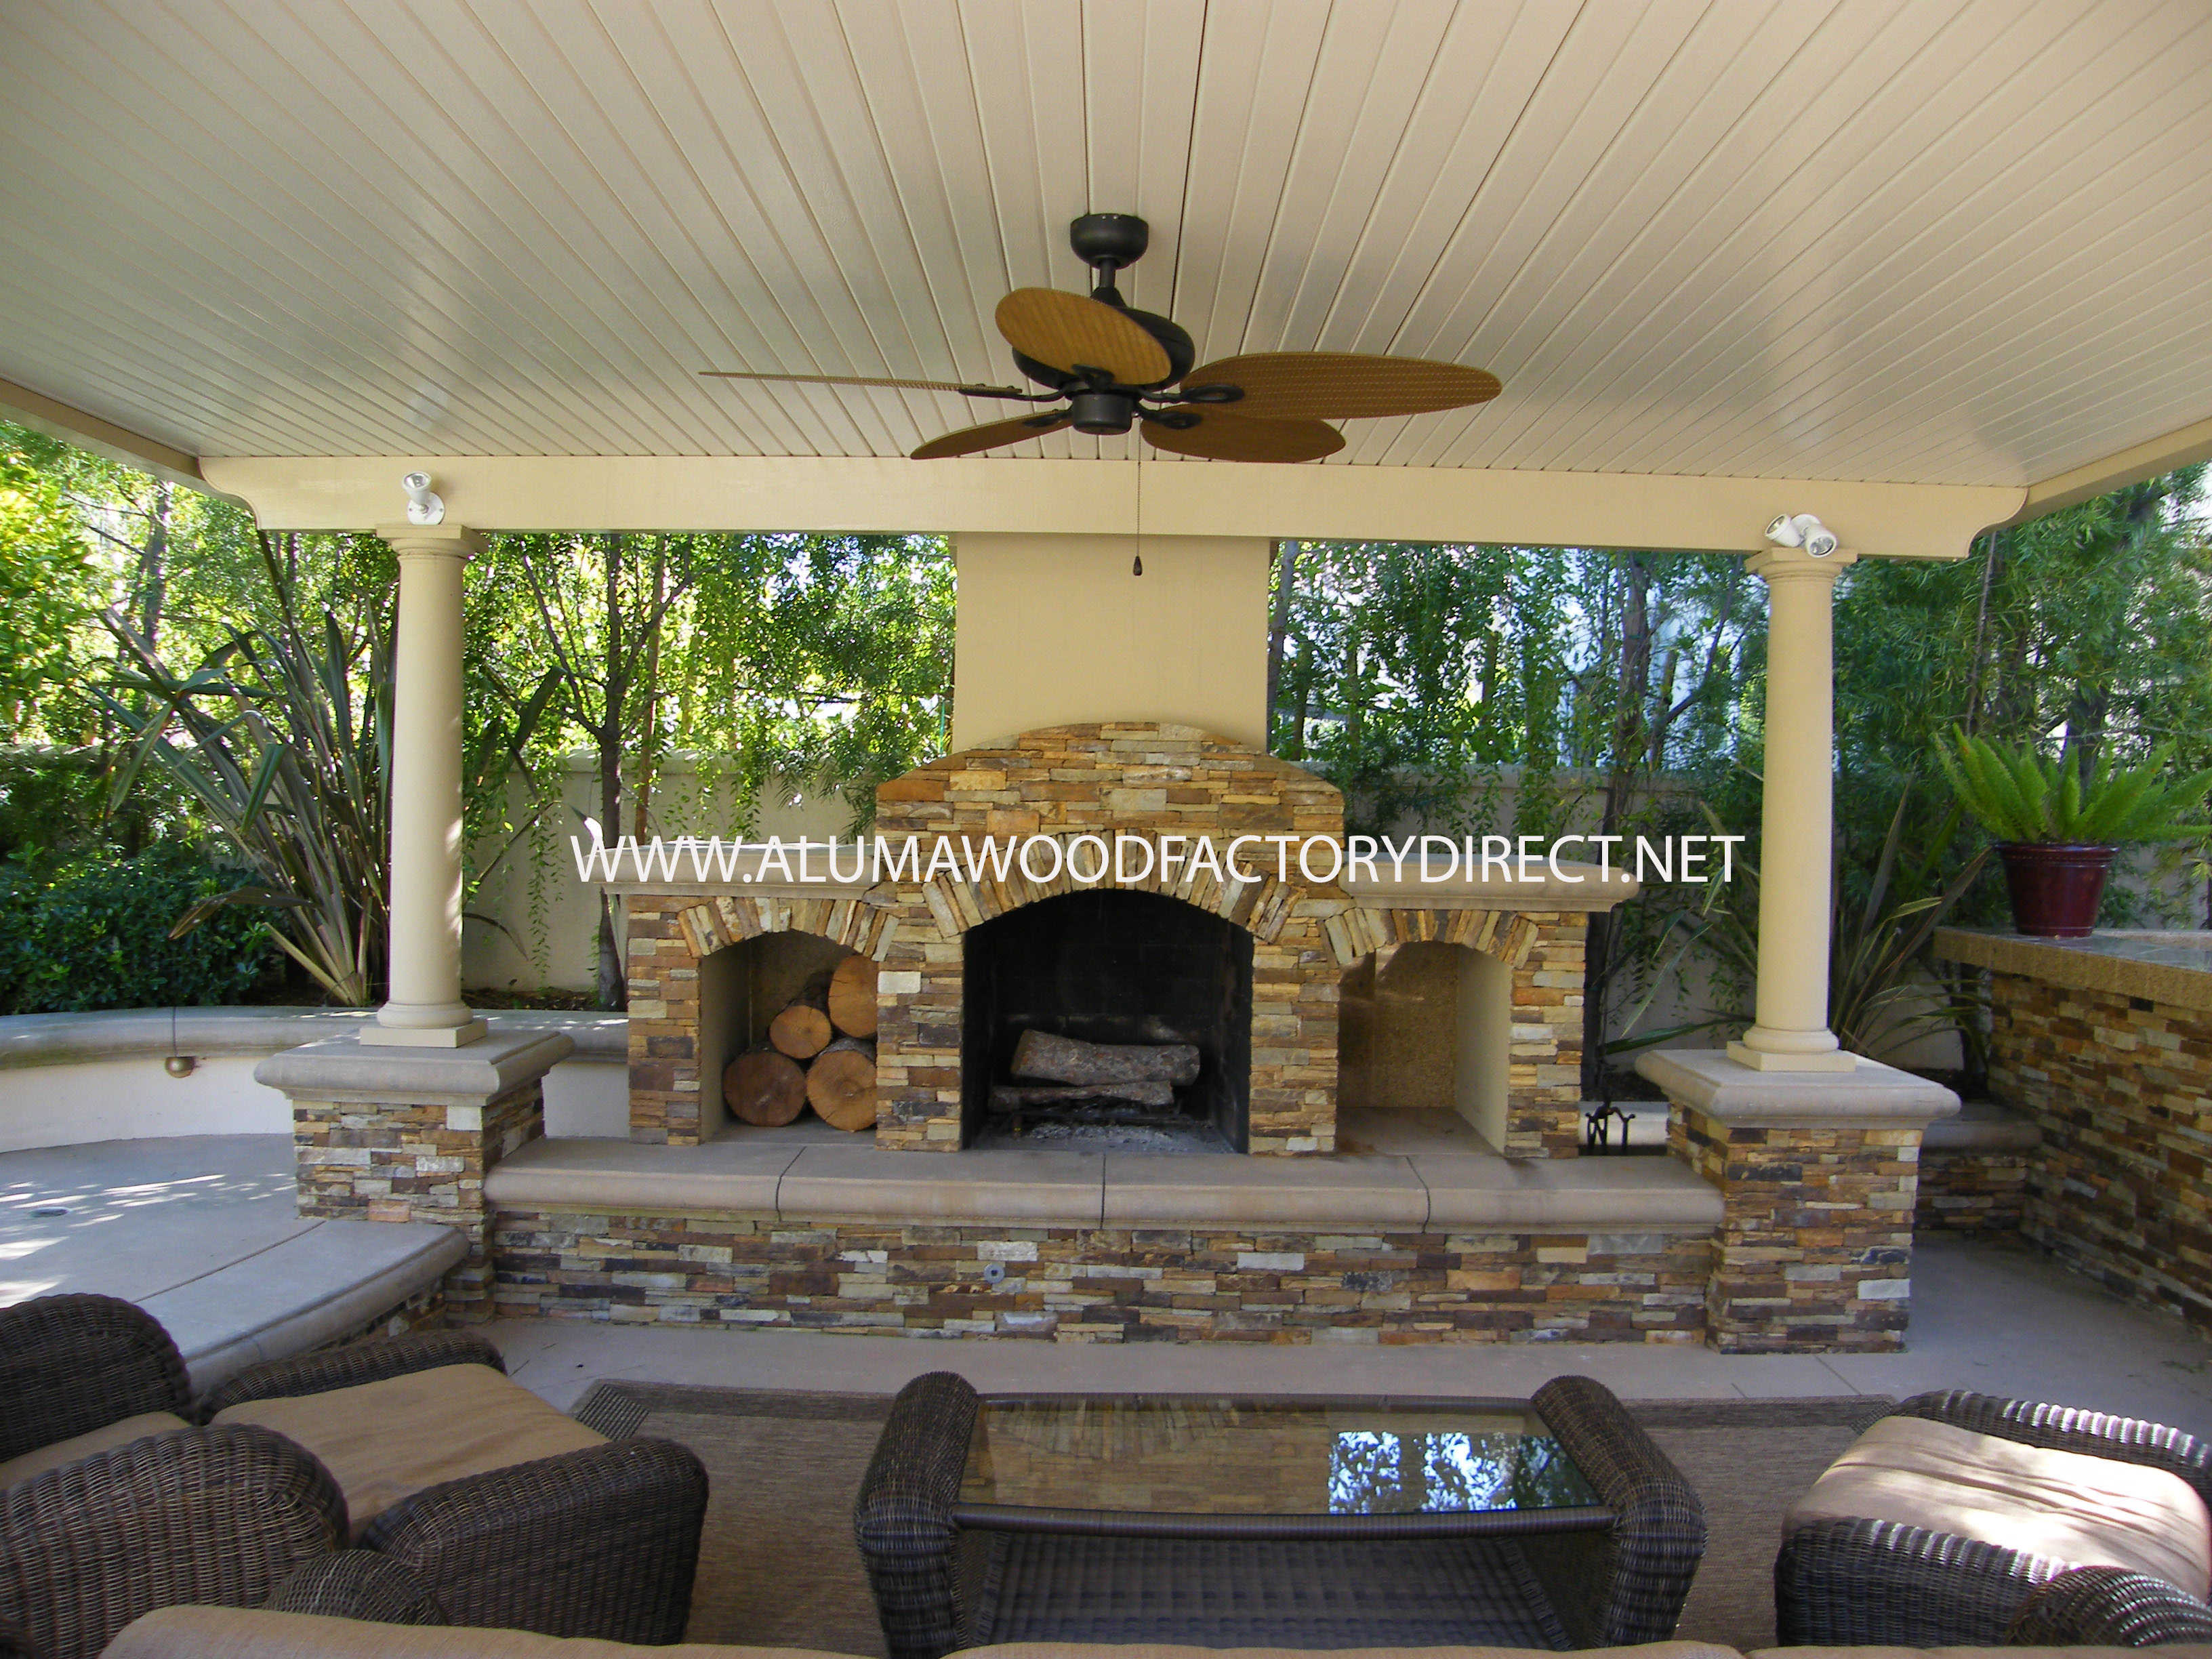 Patio Cover Cost 10 X 20 3 300, Cost Of Outdoor Covered Patio